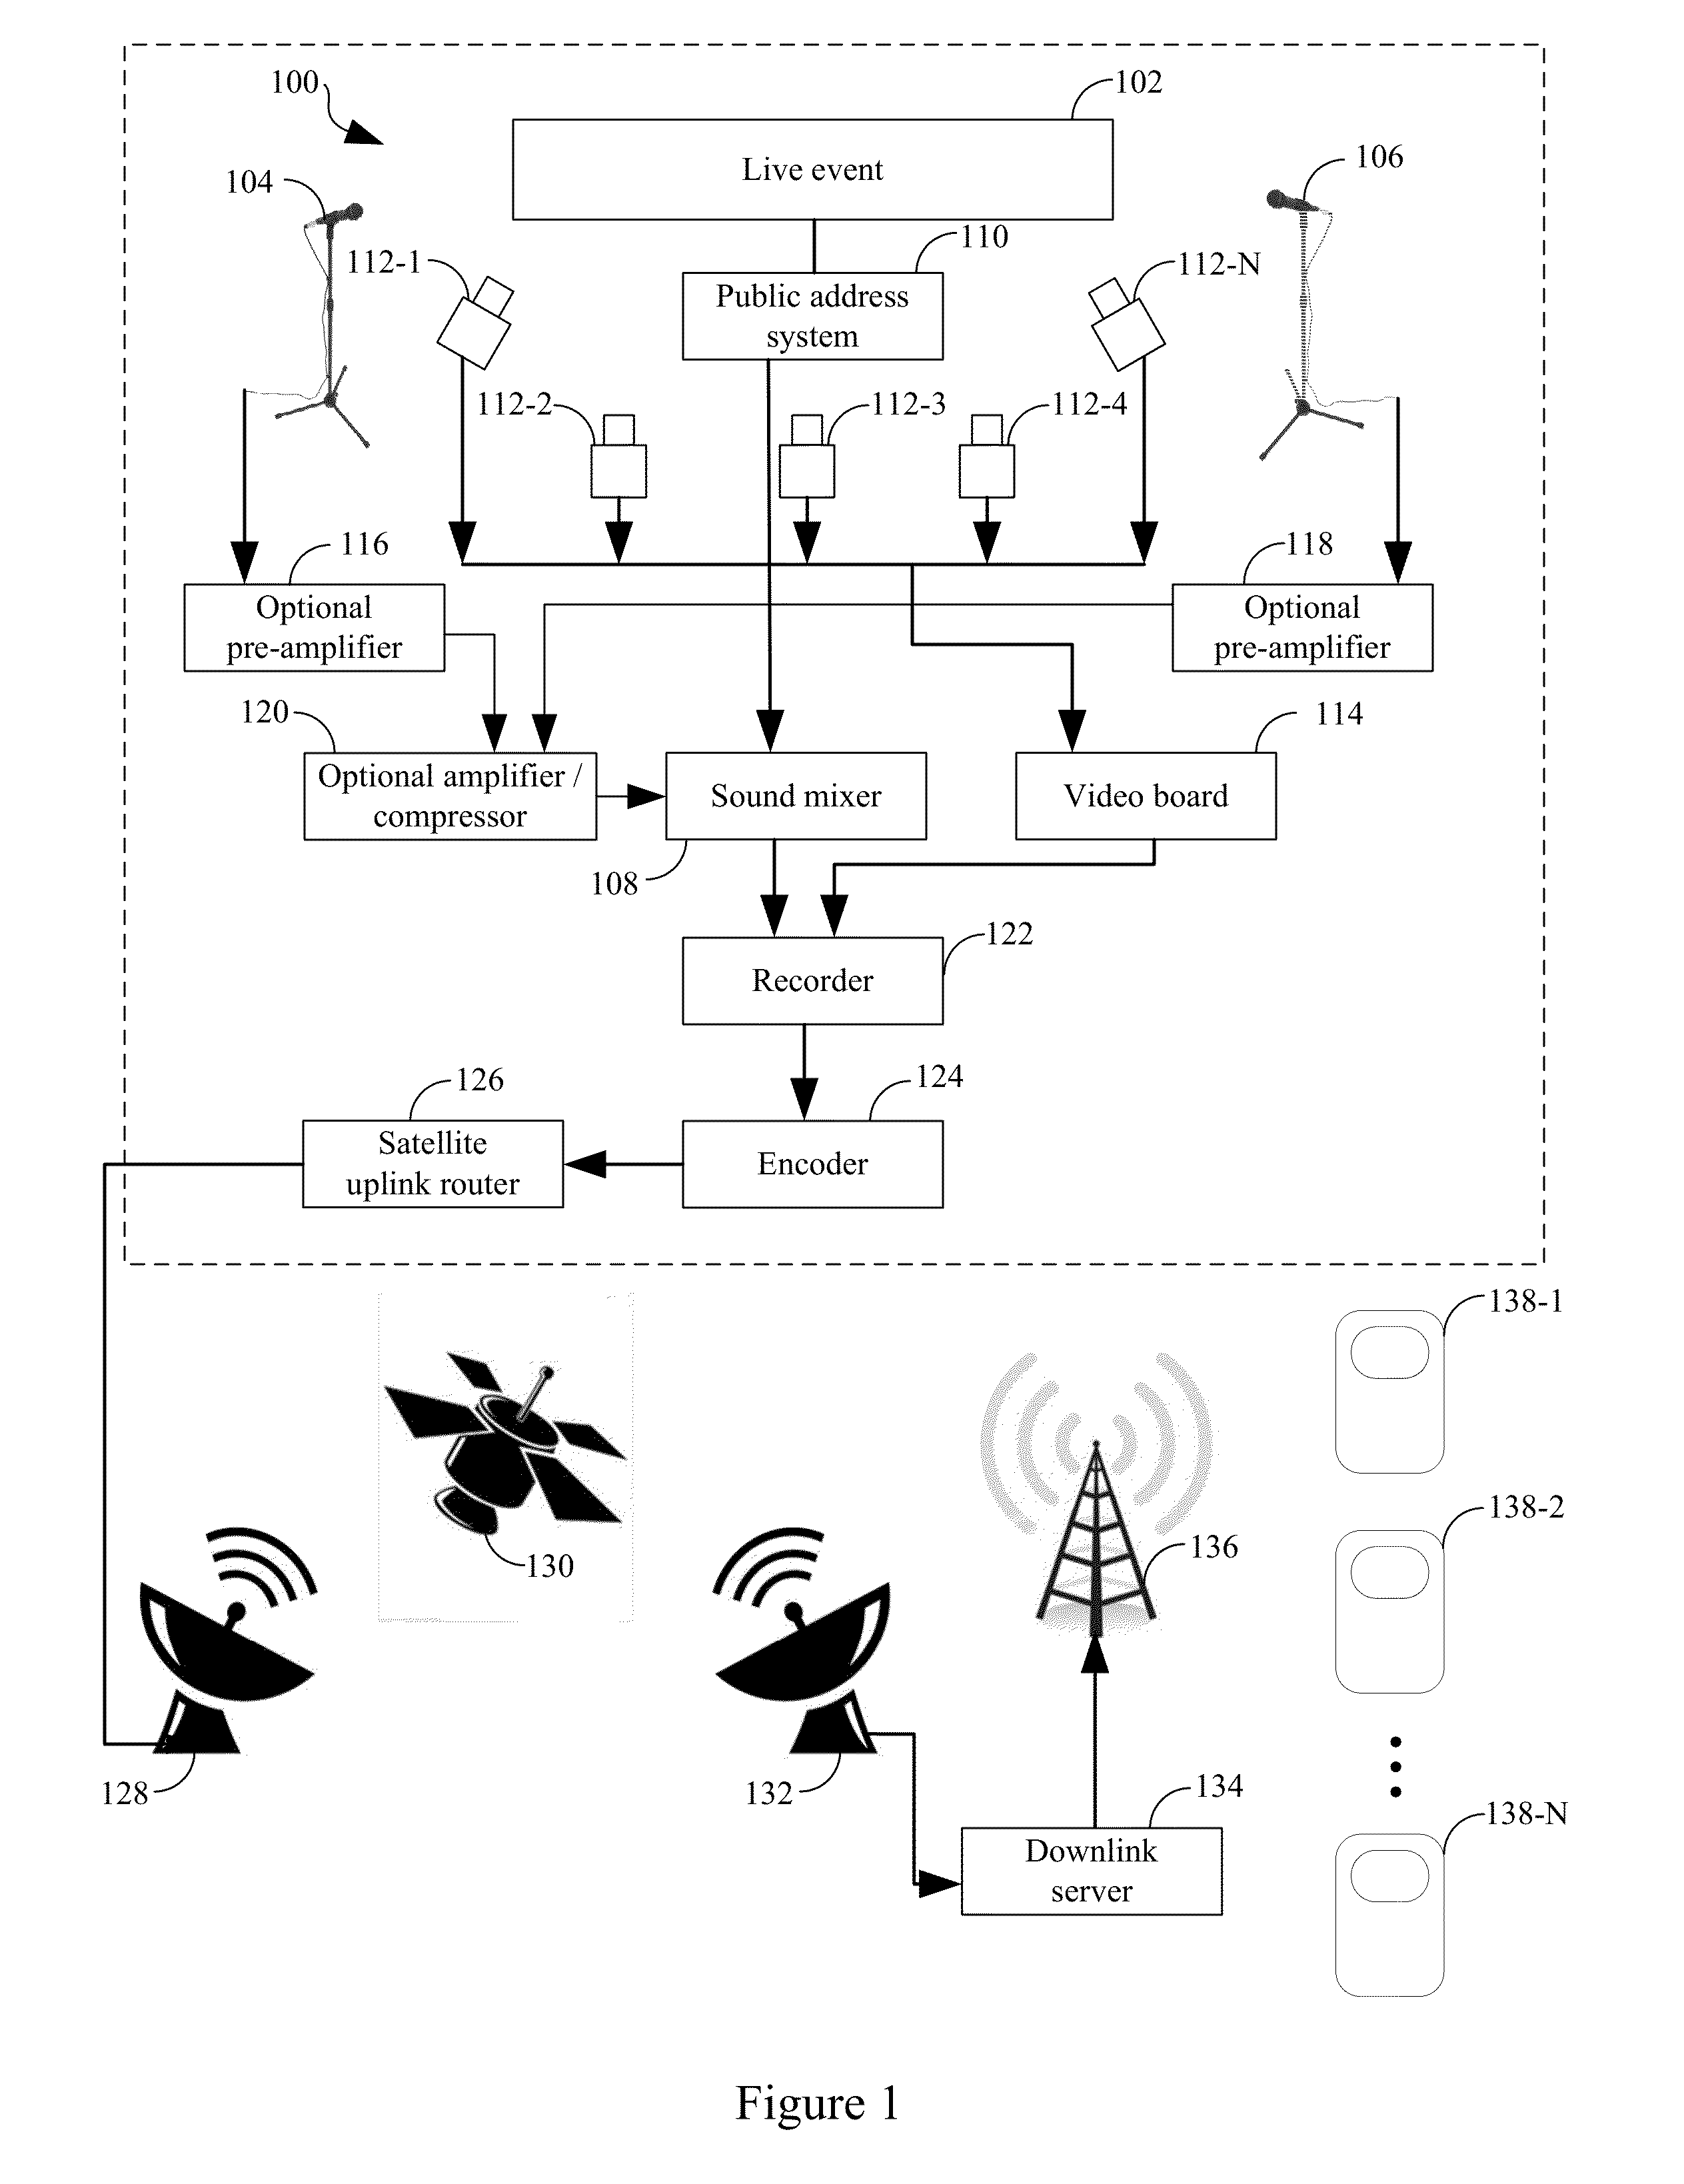 Systems and methods for communicating a live event to users using the internet